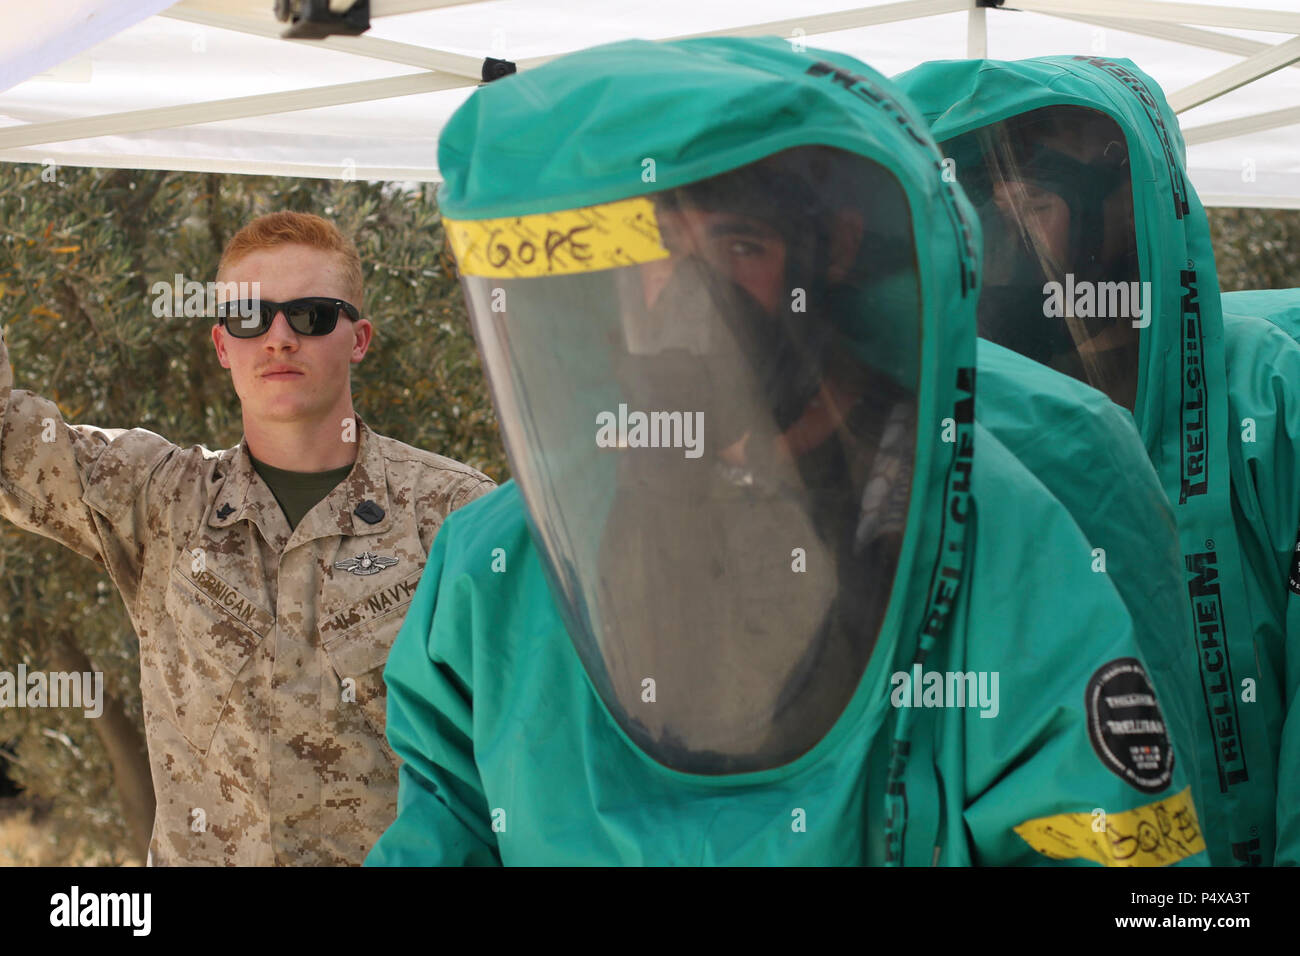 Petty Officer 3rd Class Corey Jernigan, a U.S. Navy hospital corpsman, looks on as U.S. Marines prepare take samples during a chemical, biological, radiological, nuclear training exercise, May 10, 2017, during Exercise Eager Lion at the Joint Training Center in Jordan. Jernigan, a reservist from Macon, Ga., is augmenting the U.S. Marine CBRN Platoon from Kansas City, Kan., participating in EL17. Stock Photo